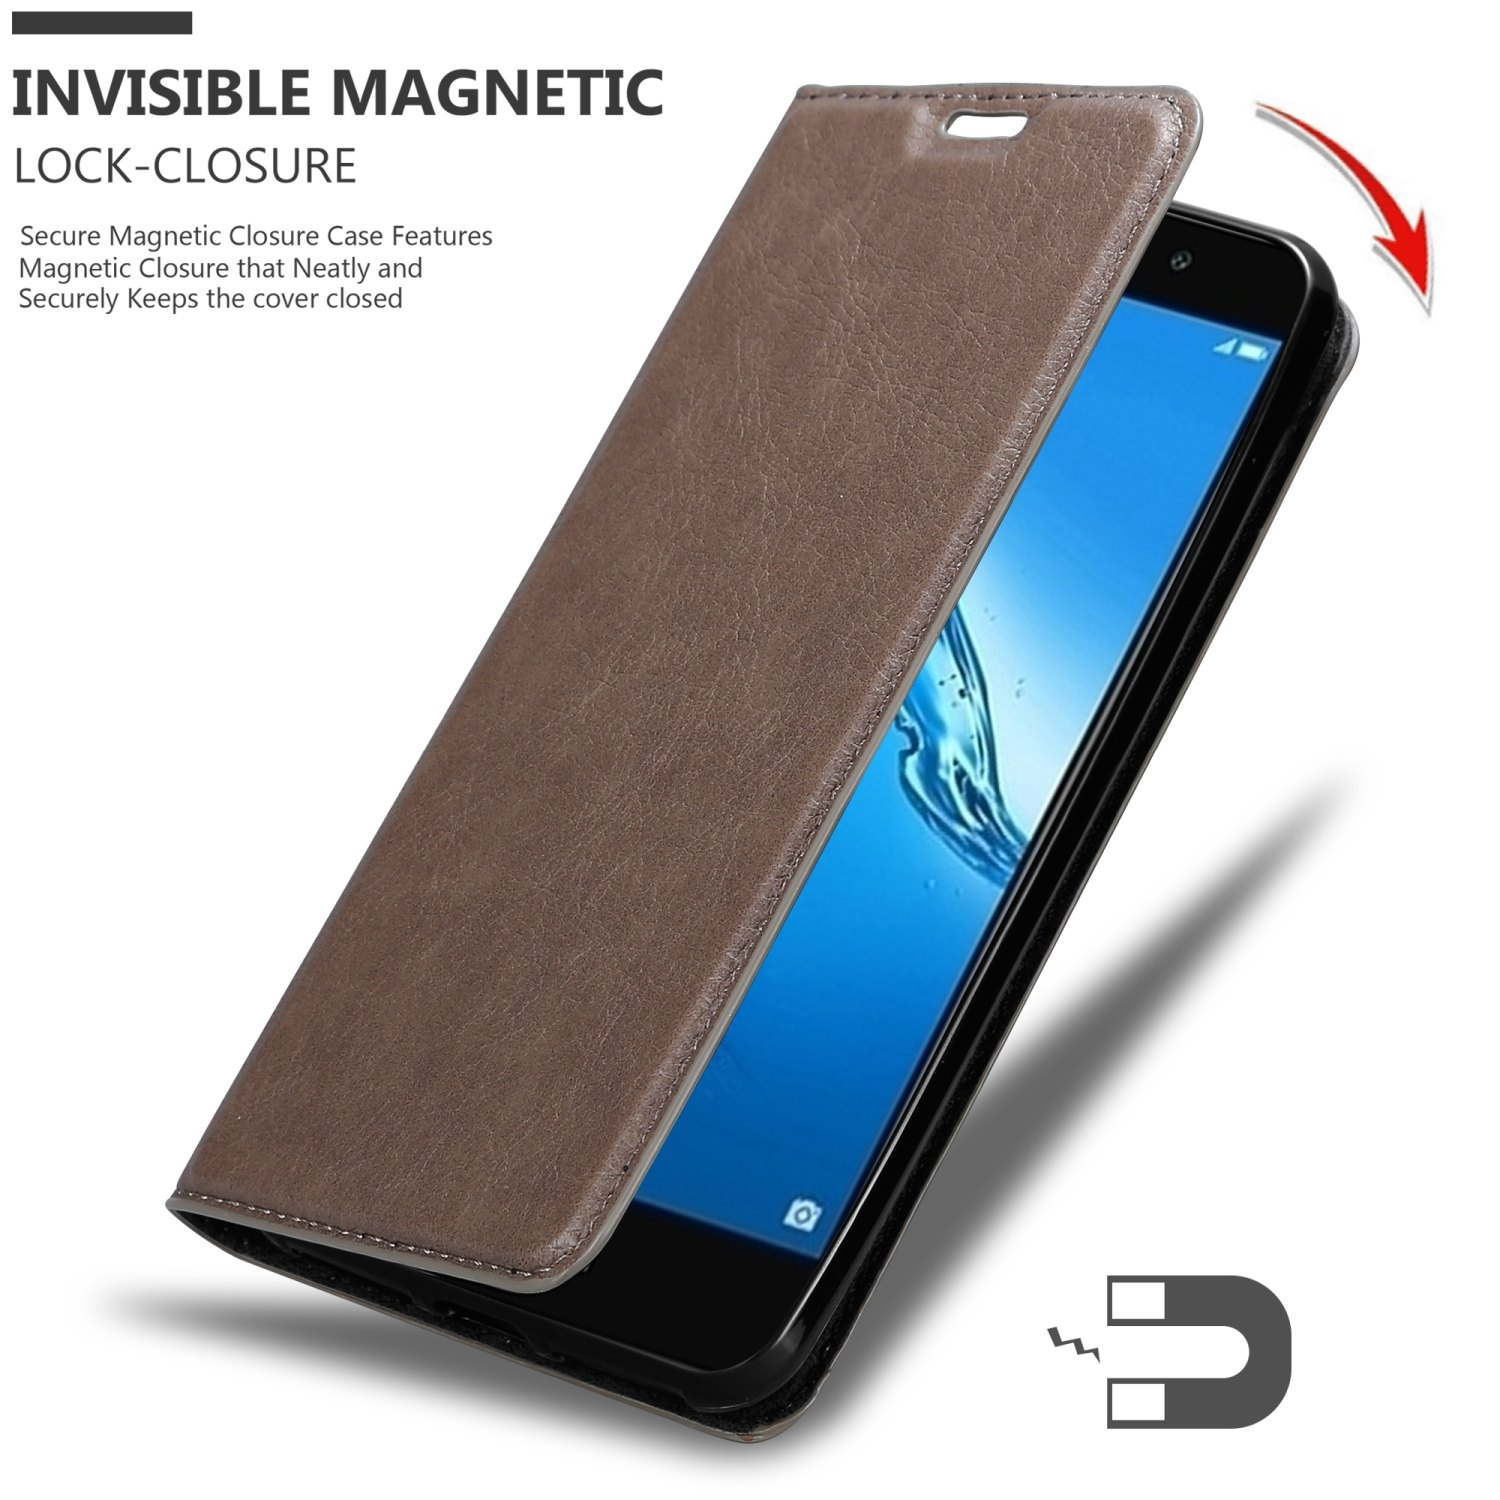 Huawei, BRAUN Magnet, CADORABO KAFFEE 2017, Invisible Hülle PRIME Book Bookcover, Y7